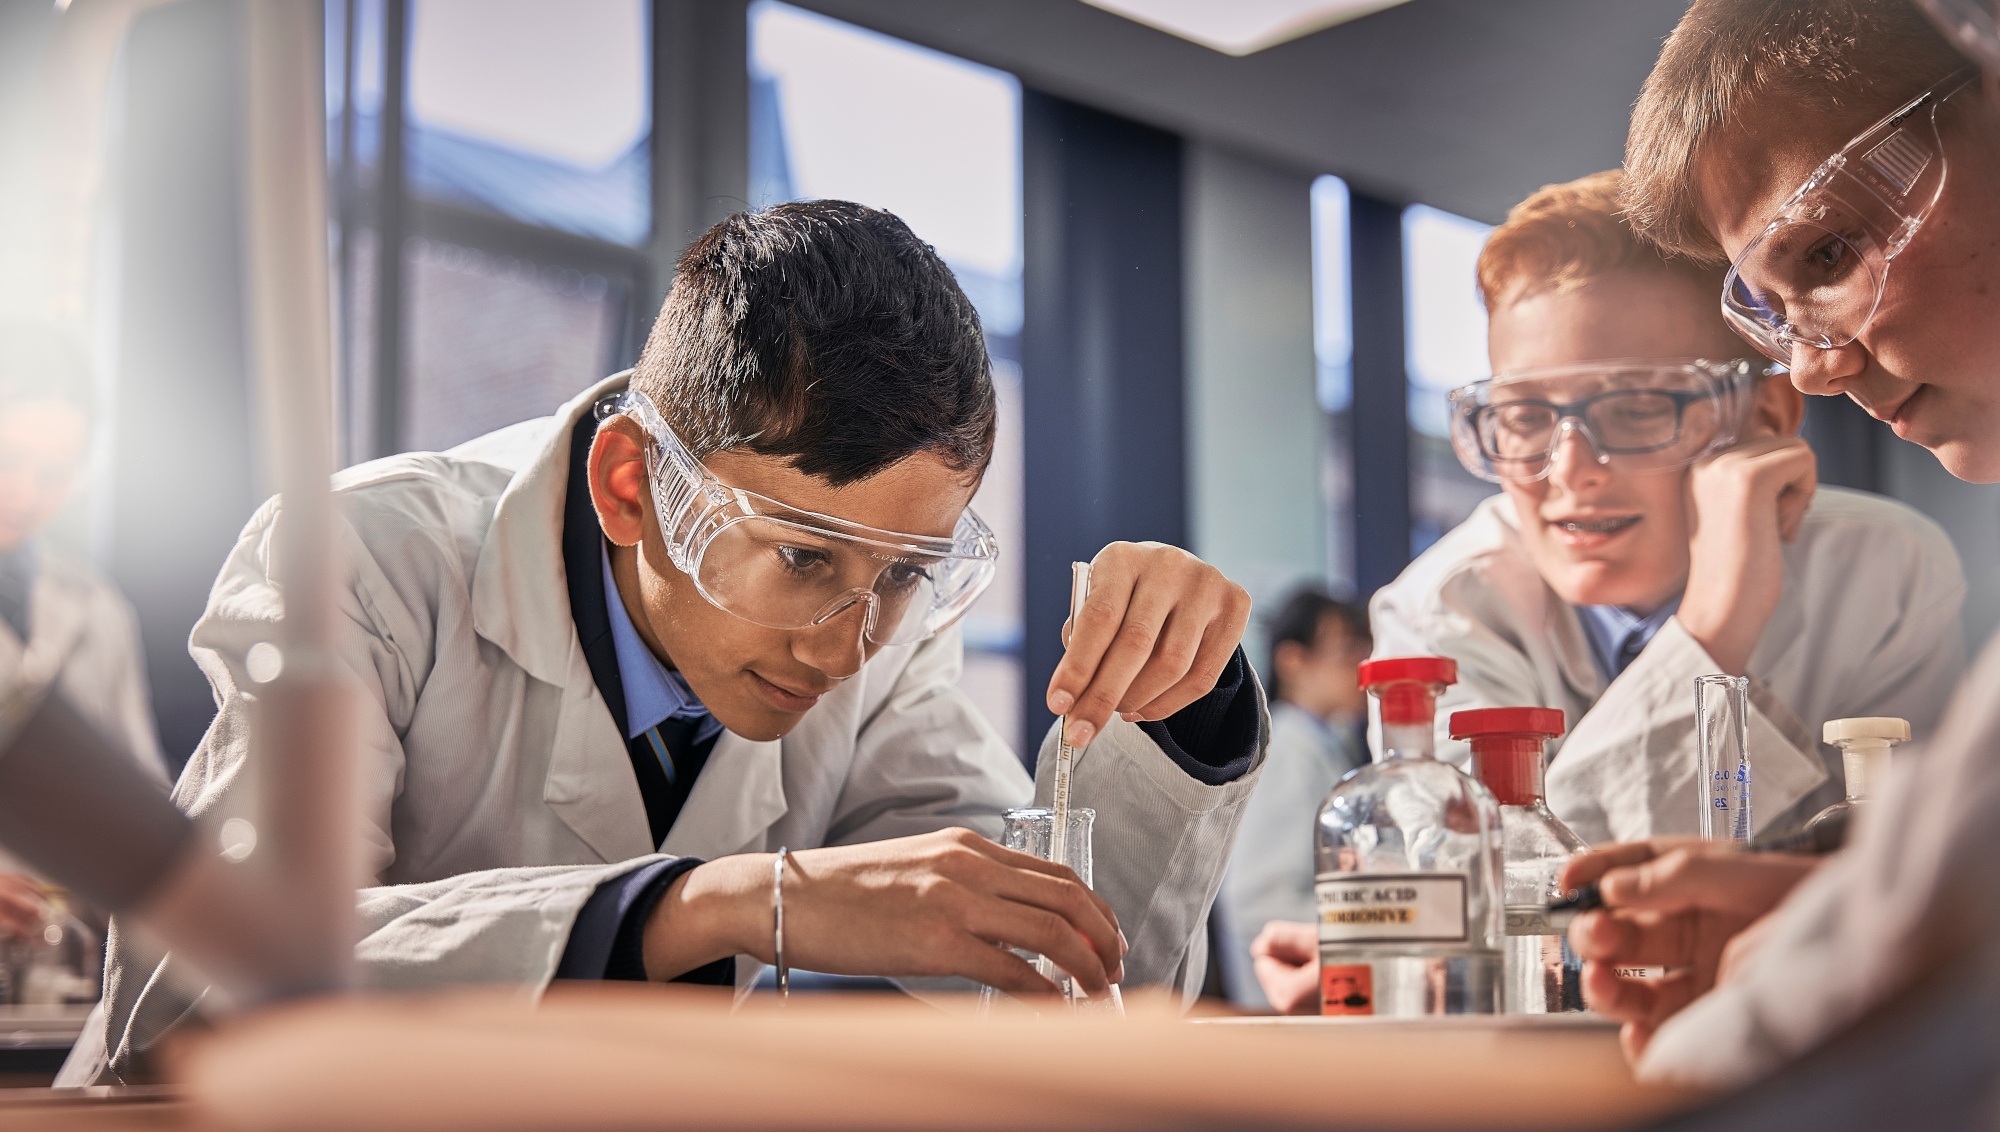 Two students in lab coats conducting a science experiment with beakers and chemicals